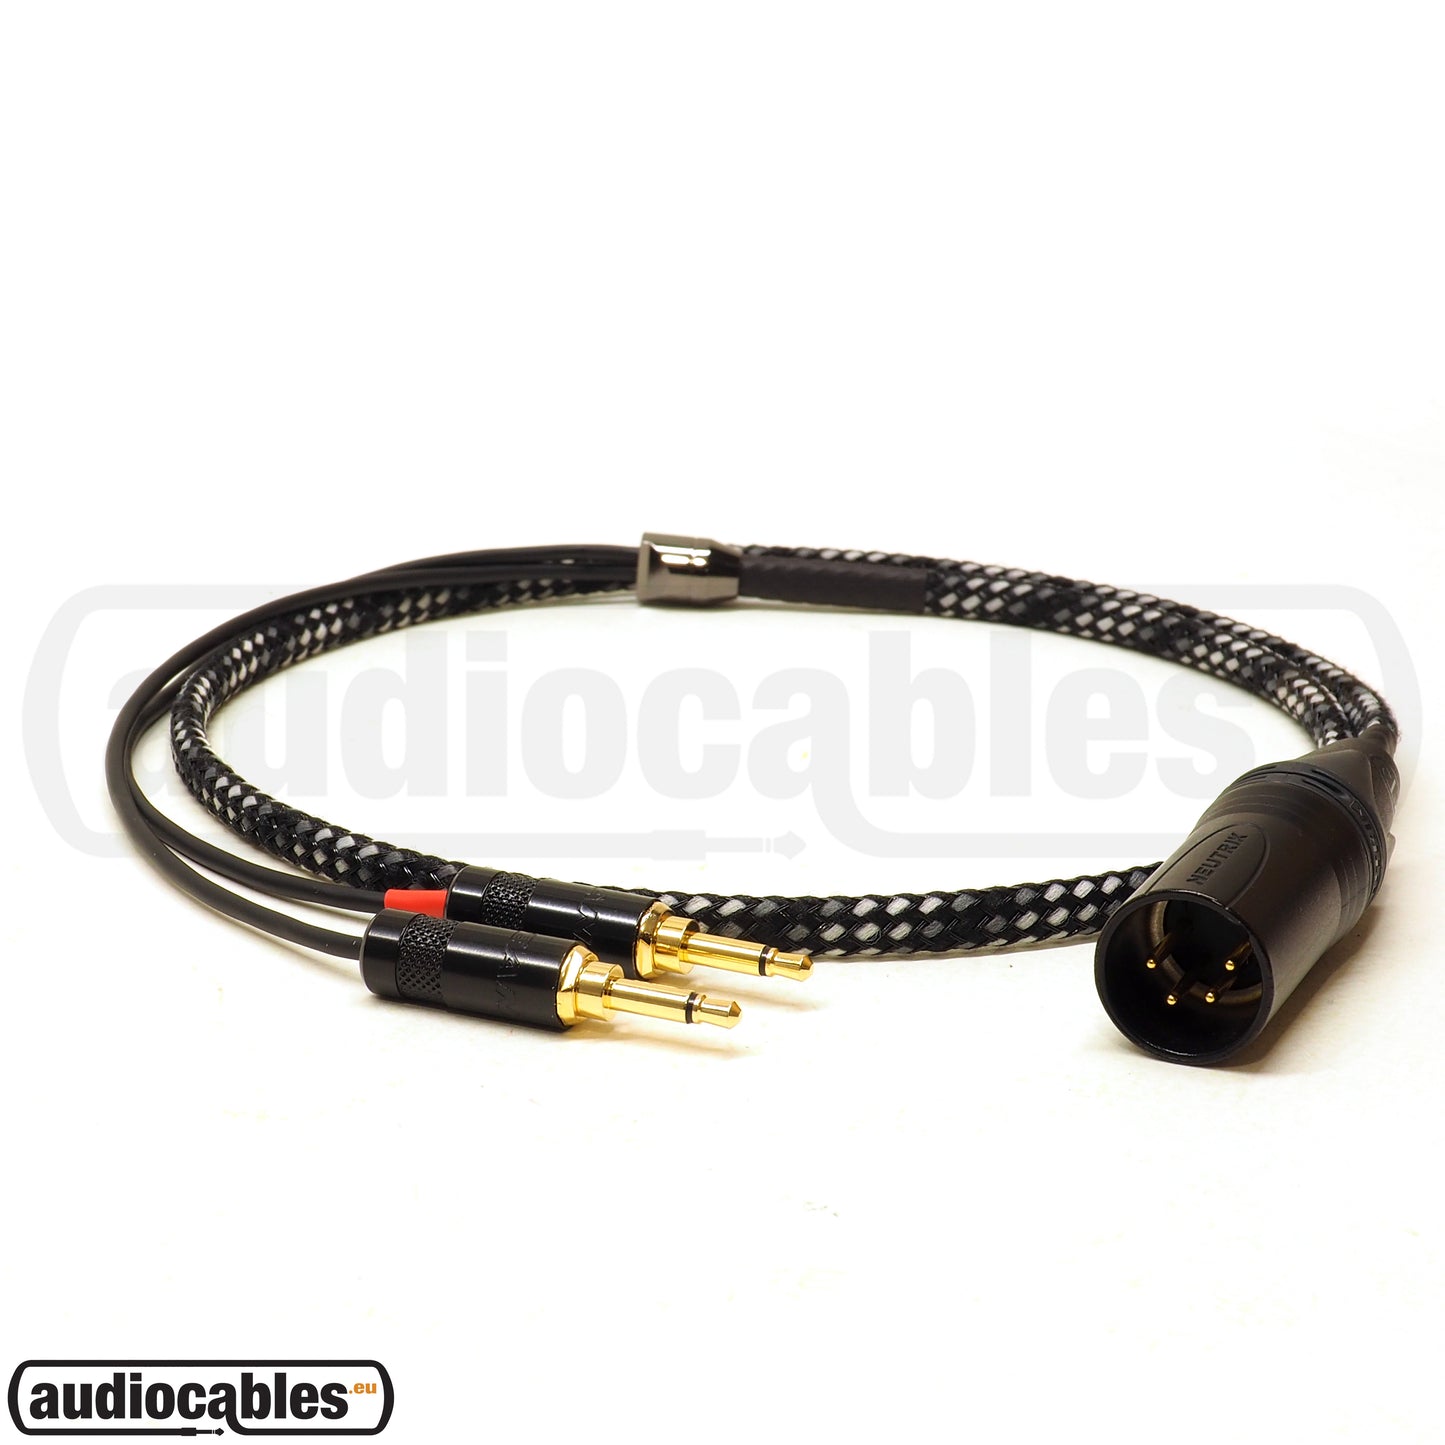 Mogami Balanced Cable for Focal, Sony & Denon Headphones (TRRRS, XLR & TRRS to dual 3.5mm)